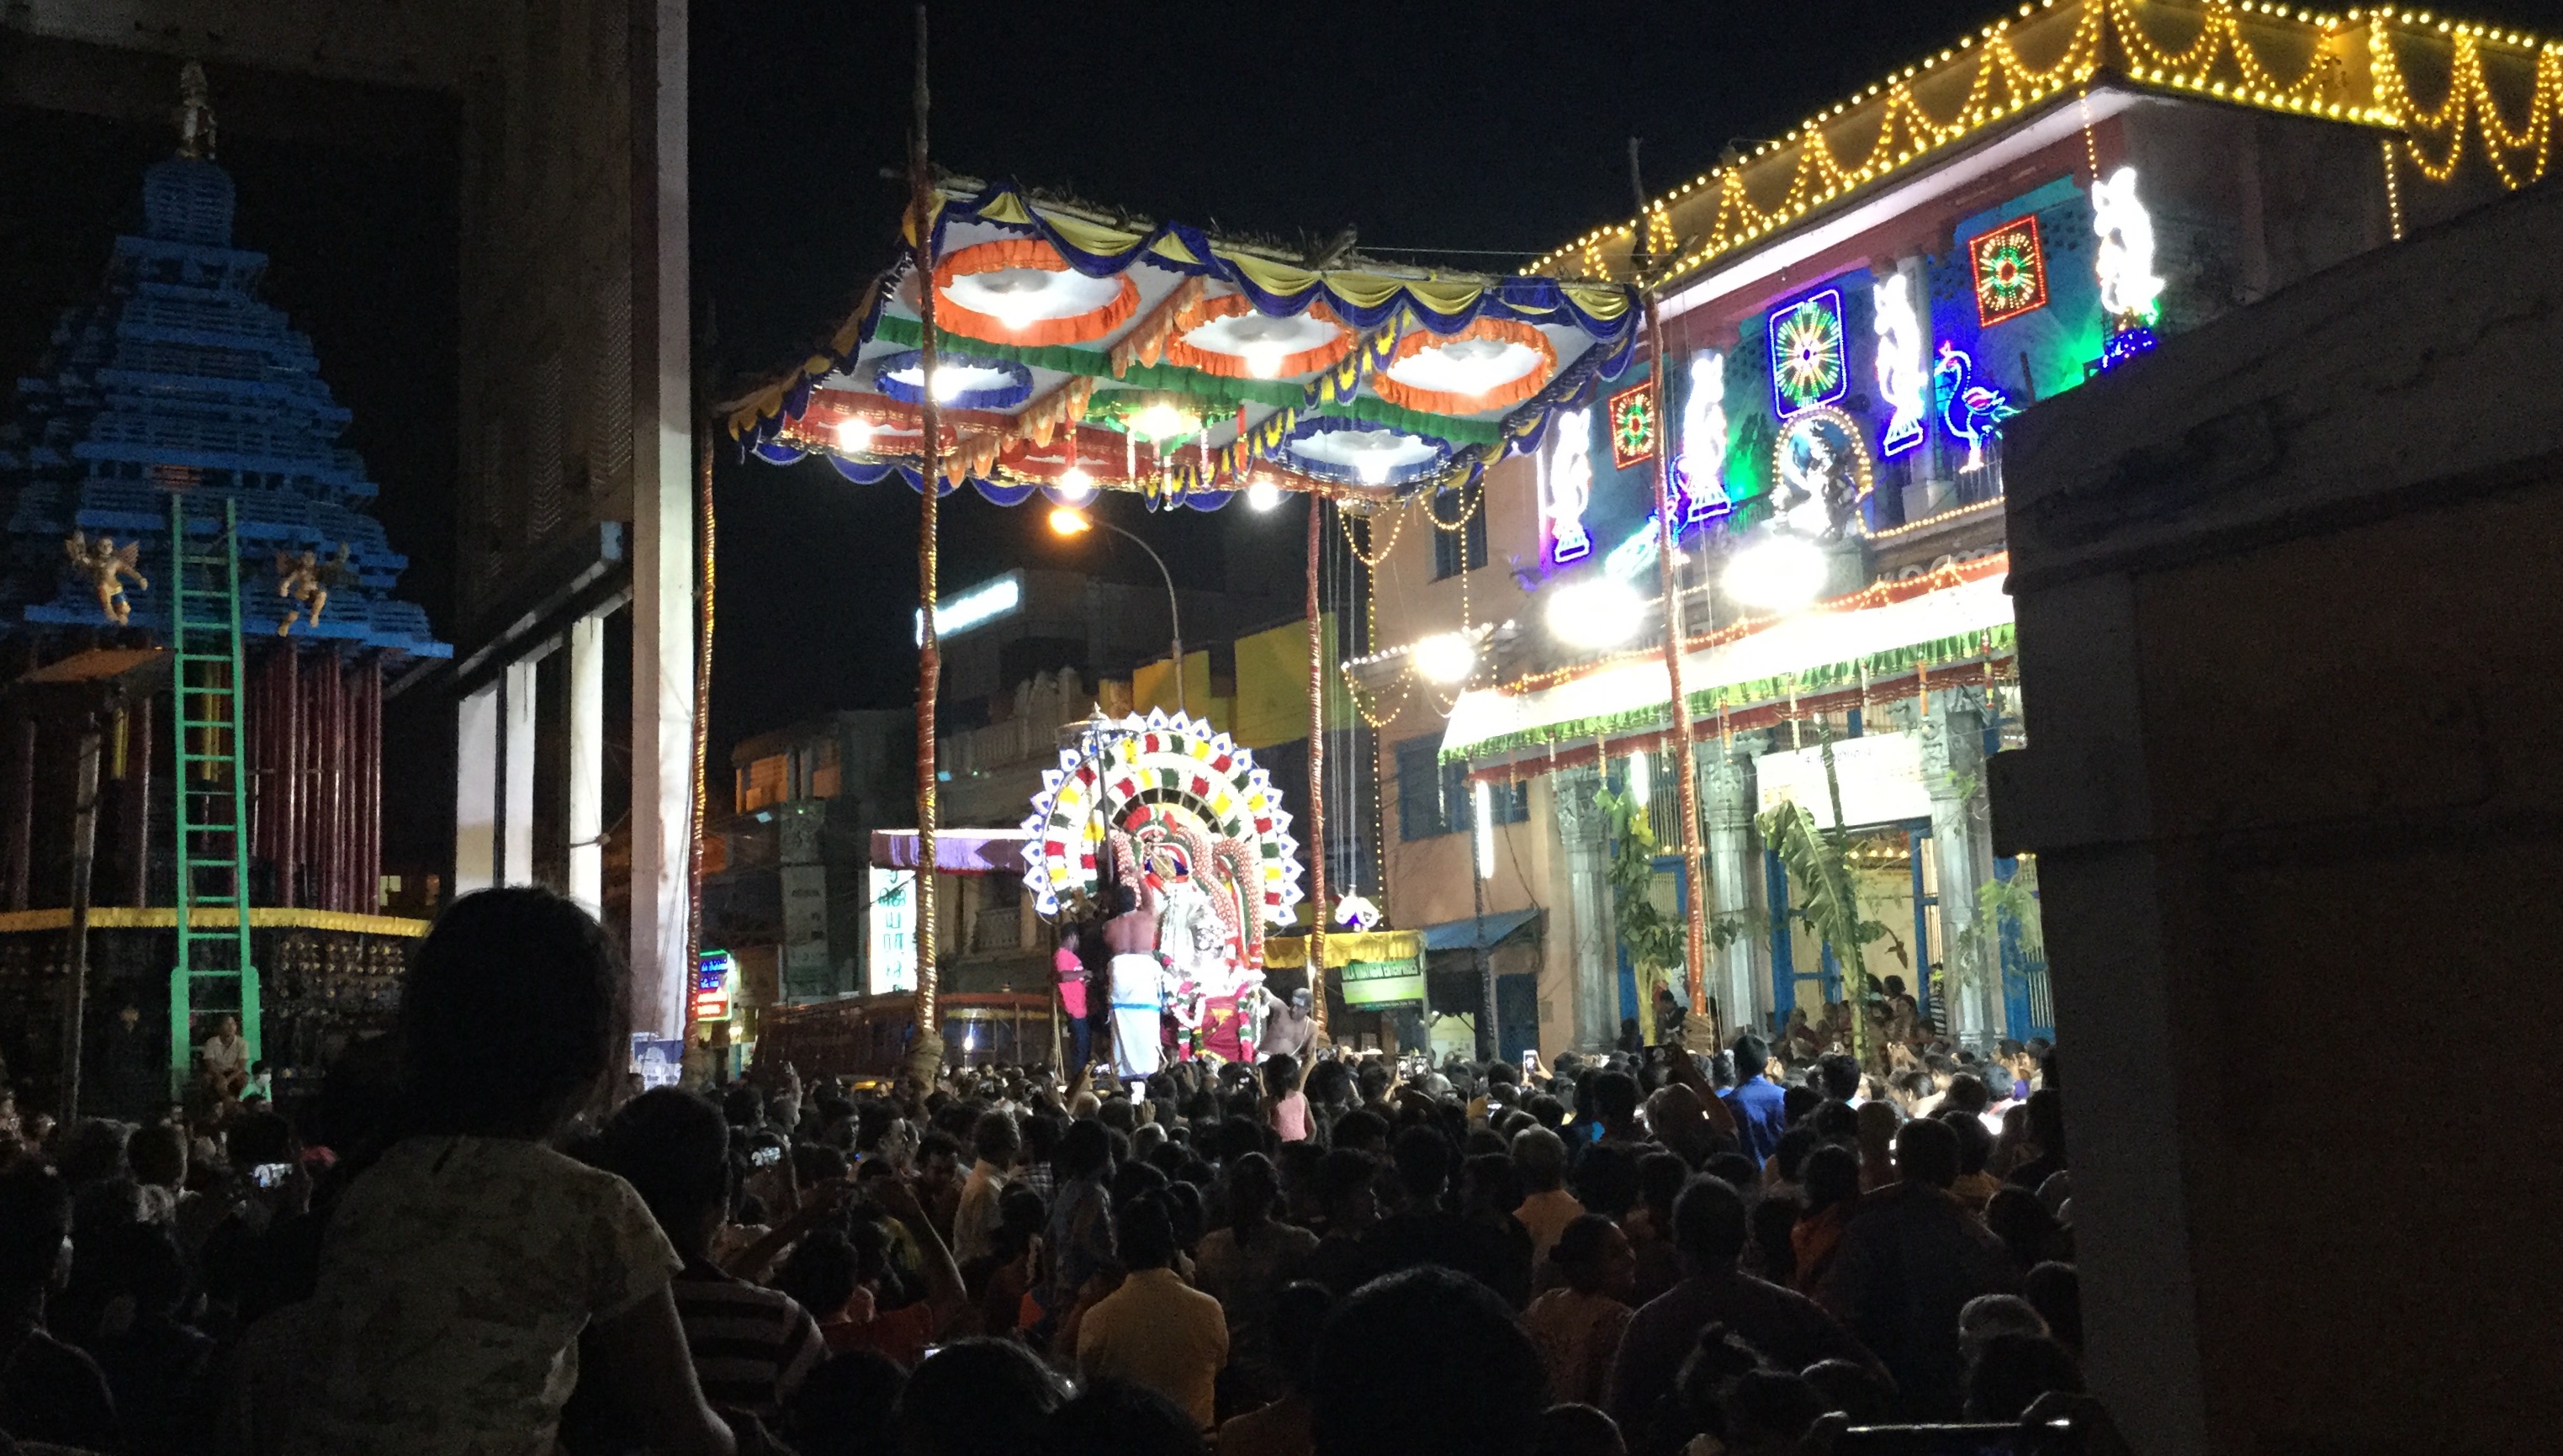 When the Kapali temple festival was NOT held